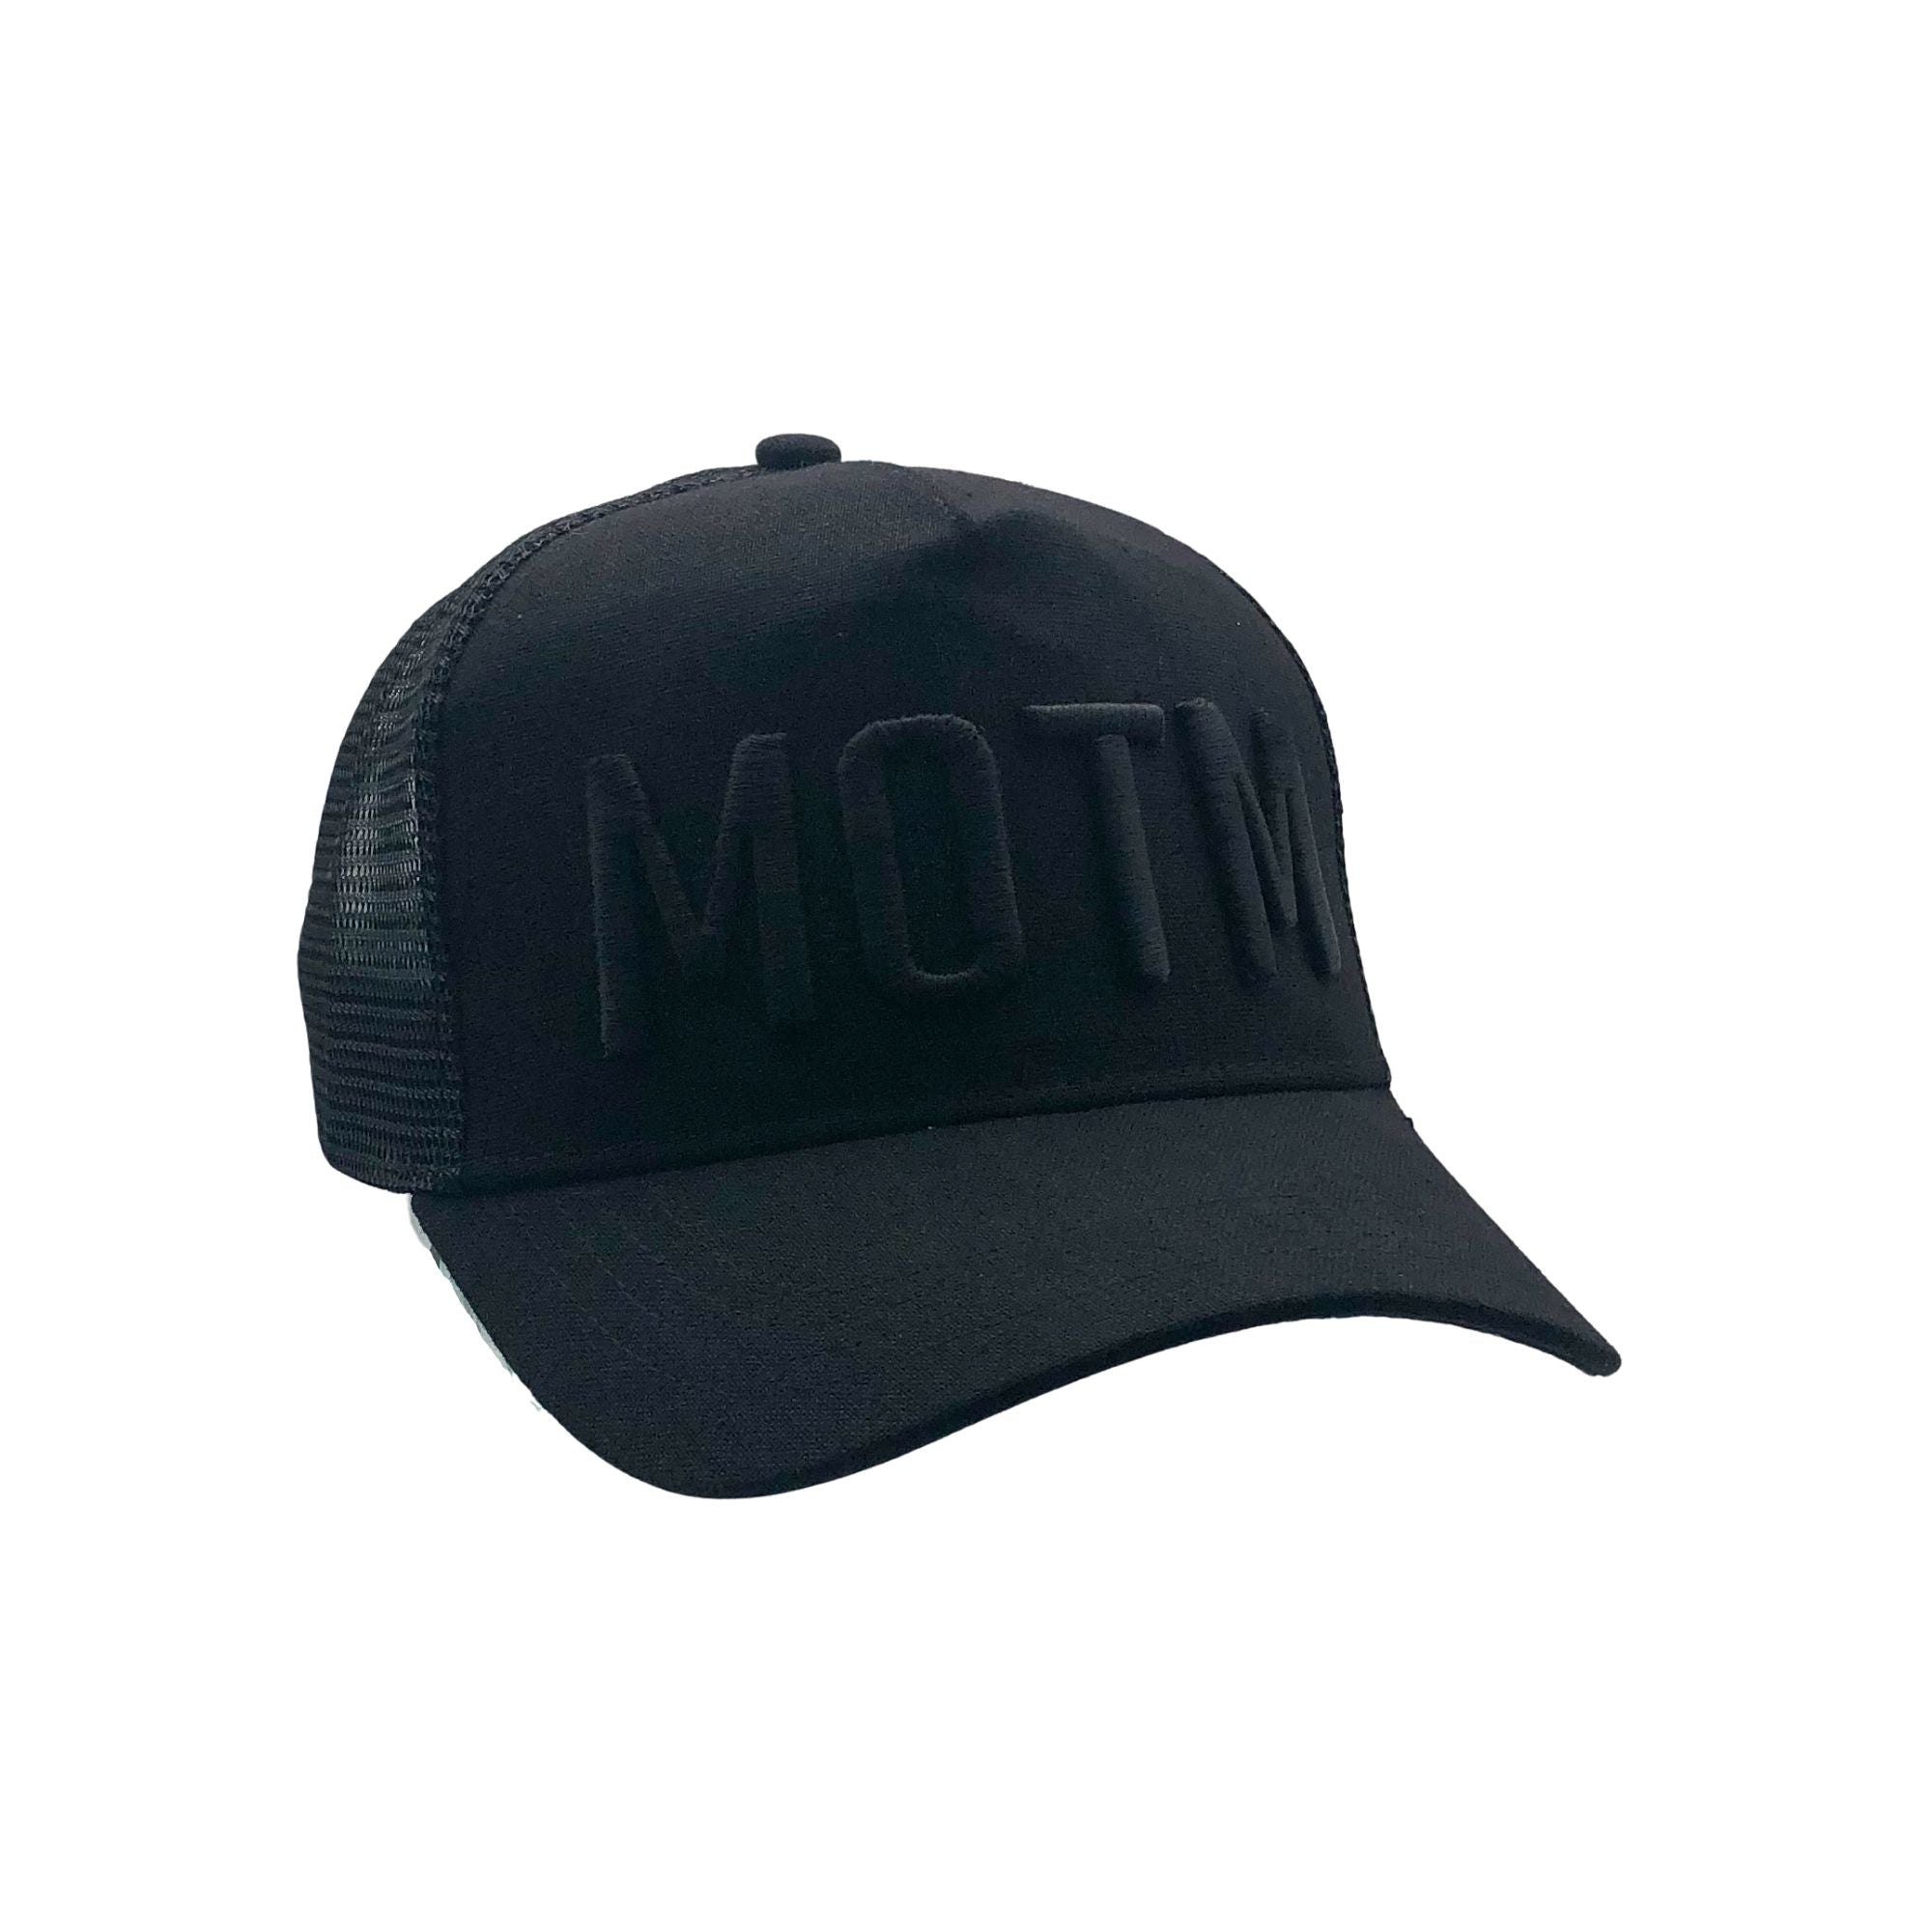 MAN OF THE MATCH® Roberto - Official 3D Bl MOTM Embroidered Cap Carlos